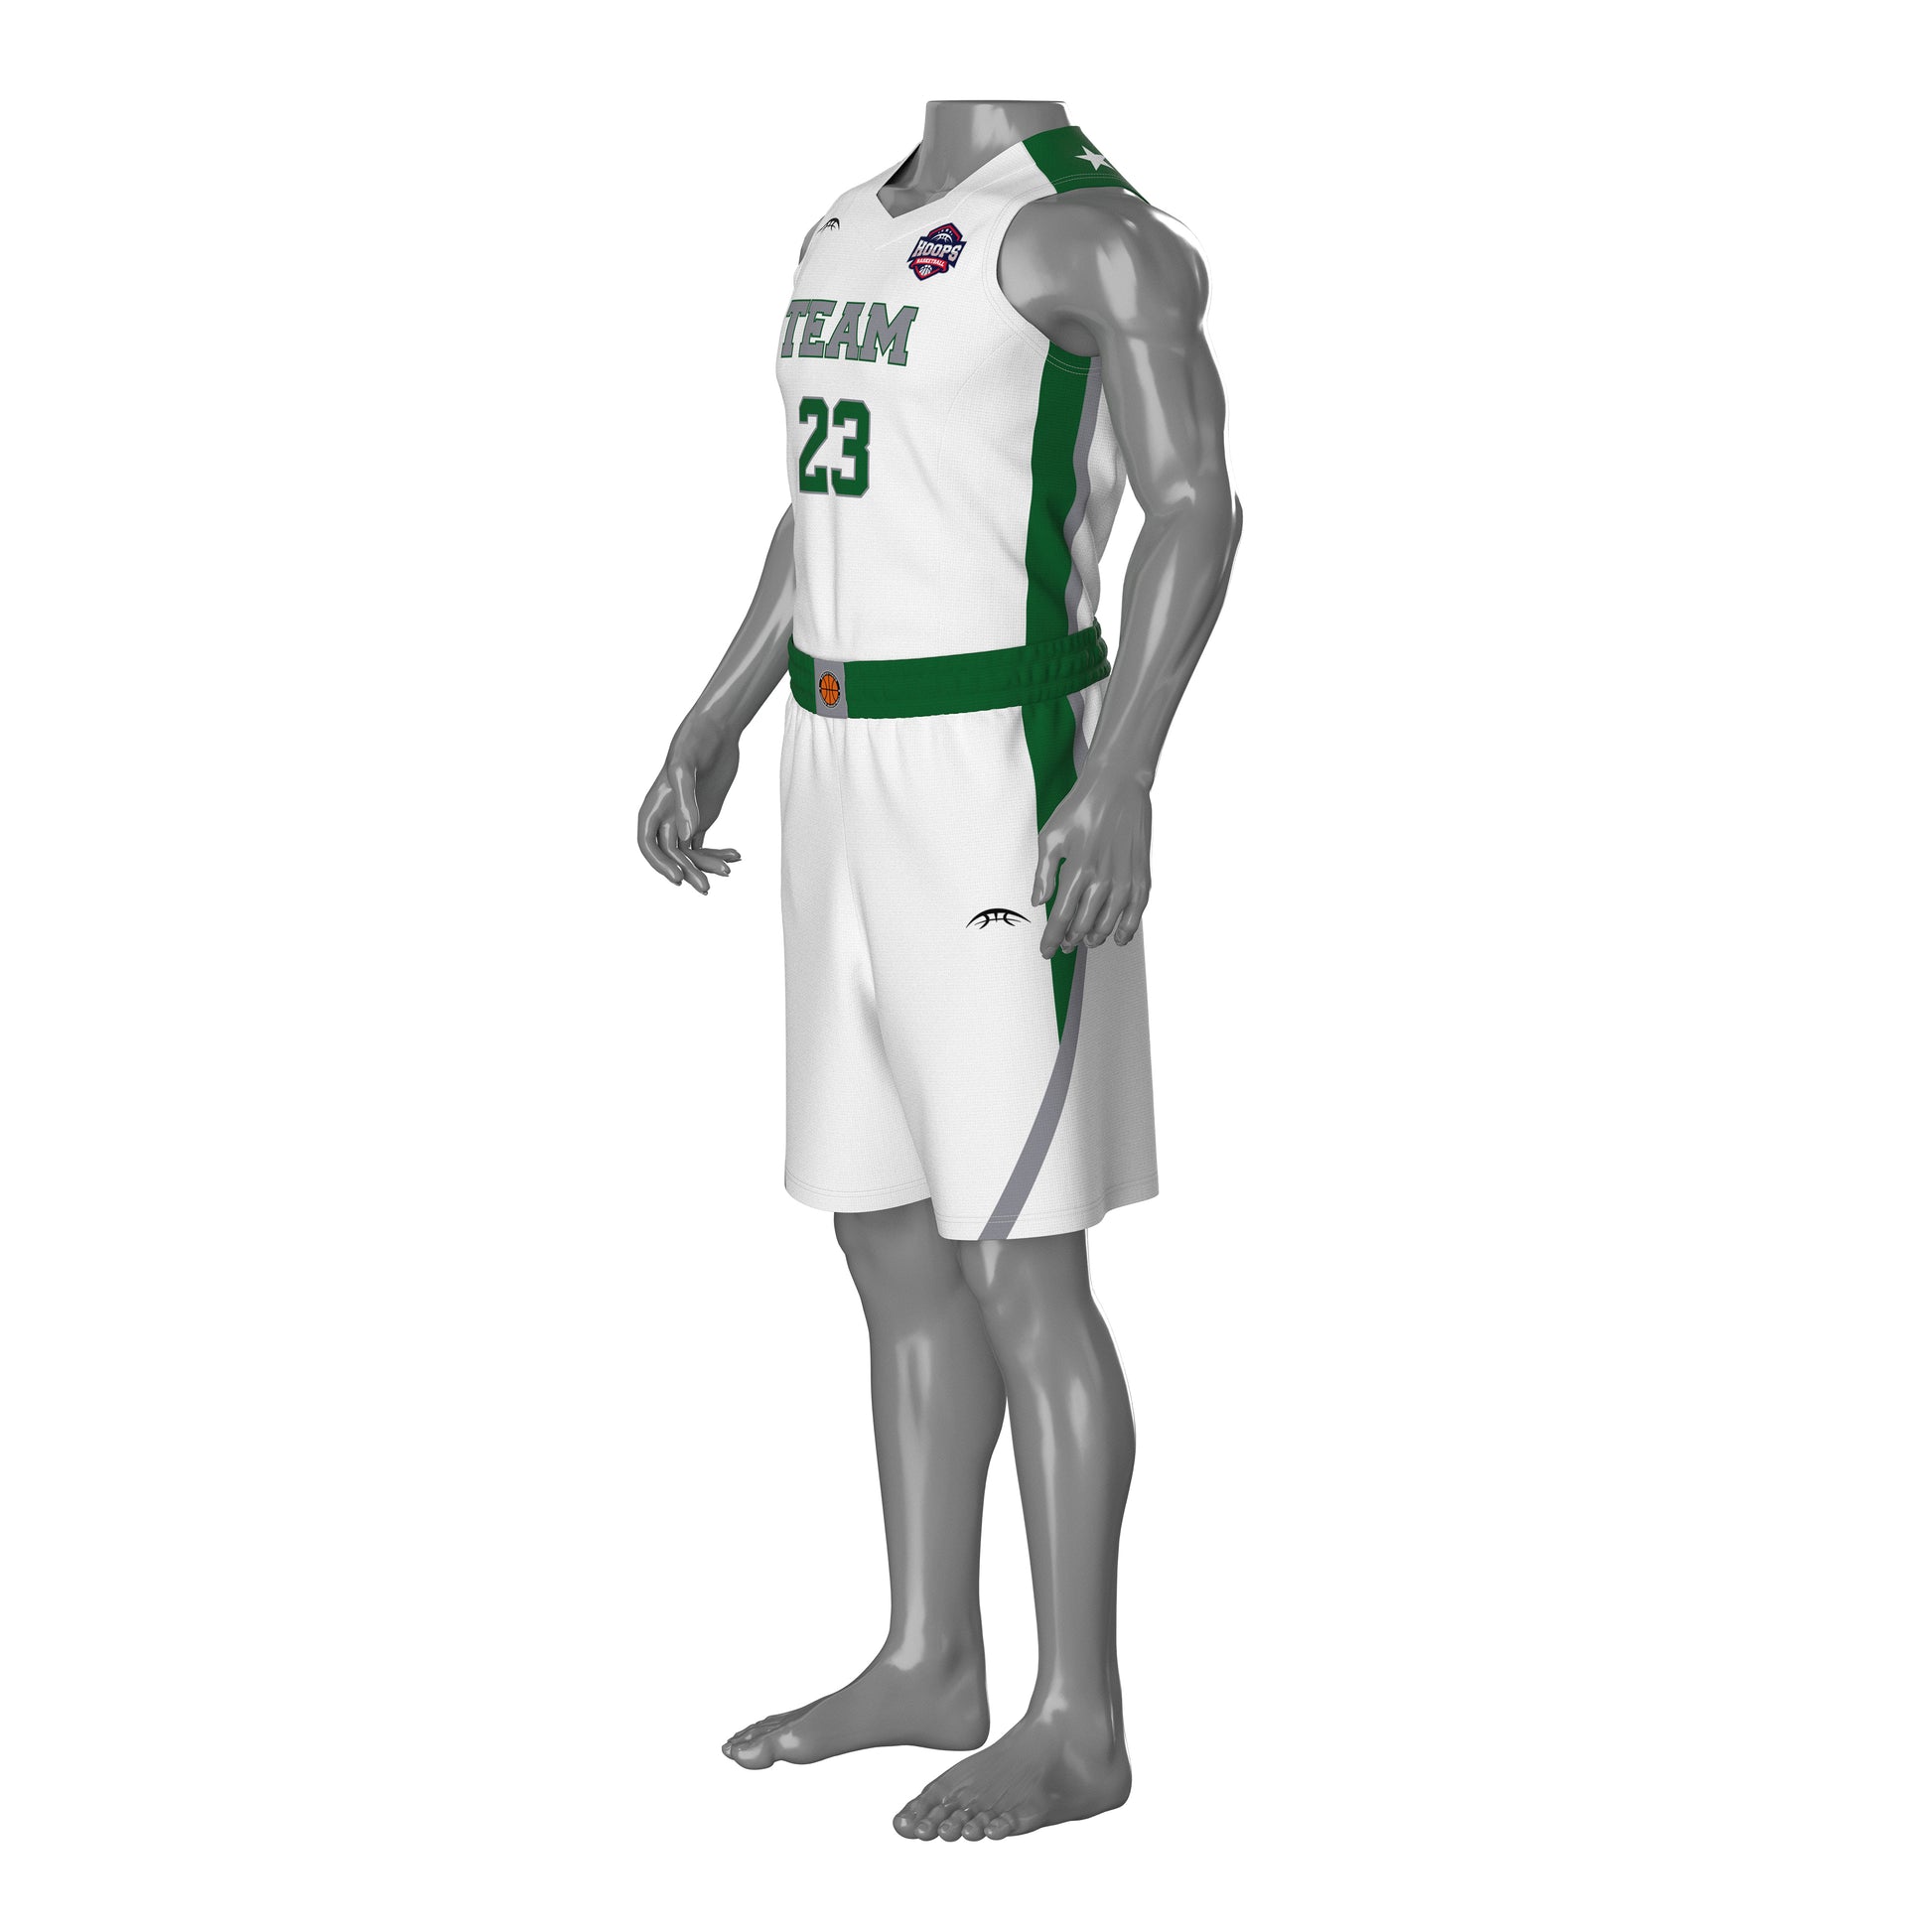 Custom Basketball Neon Green Jerseys and Uniforms Authentic Sale